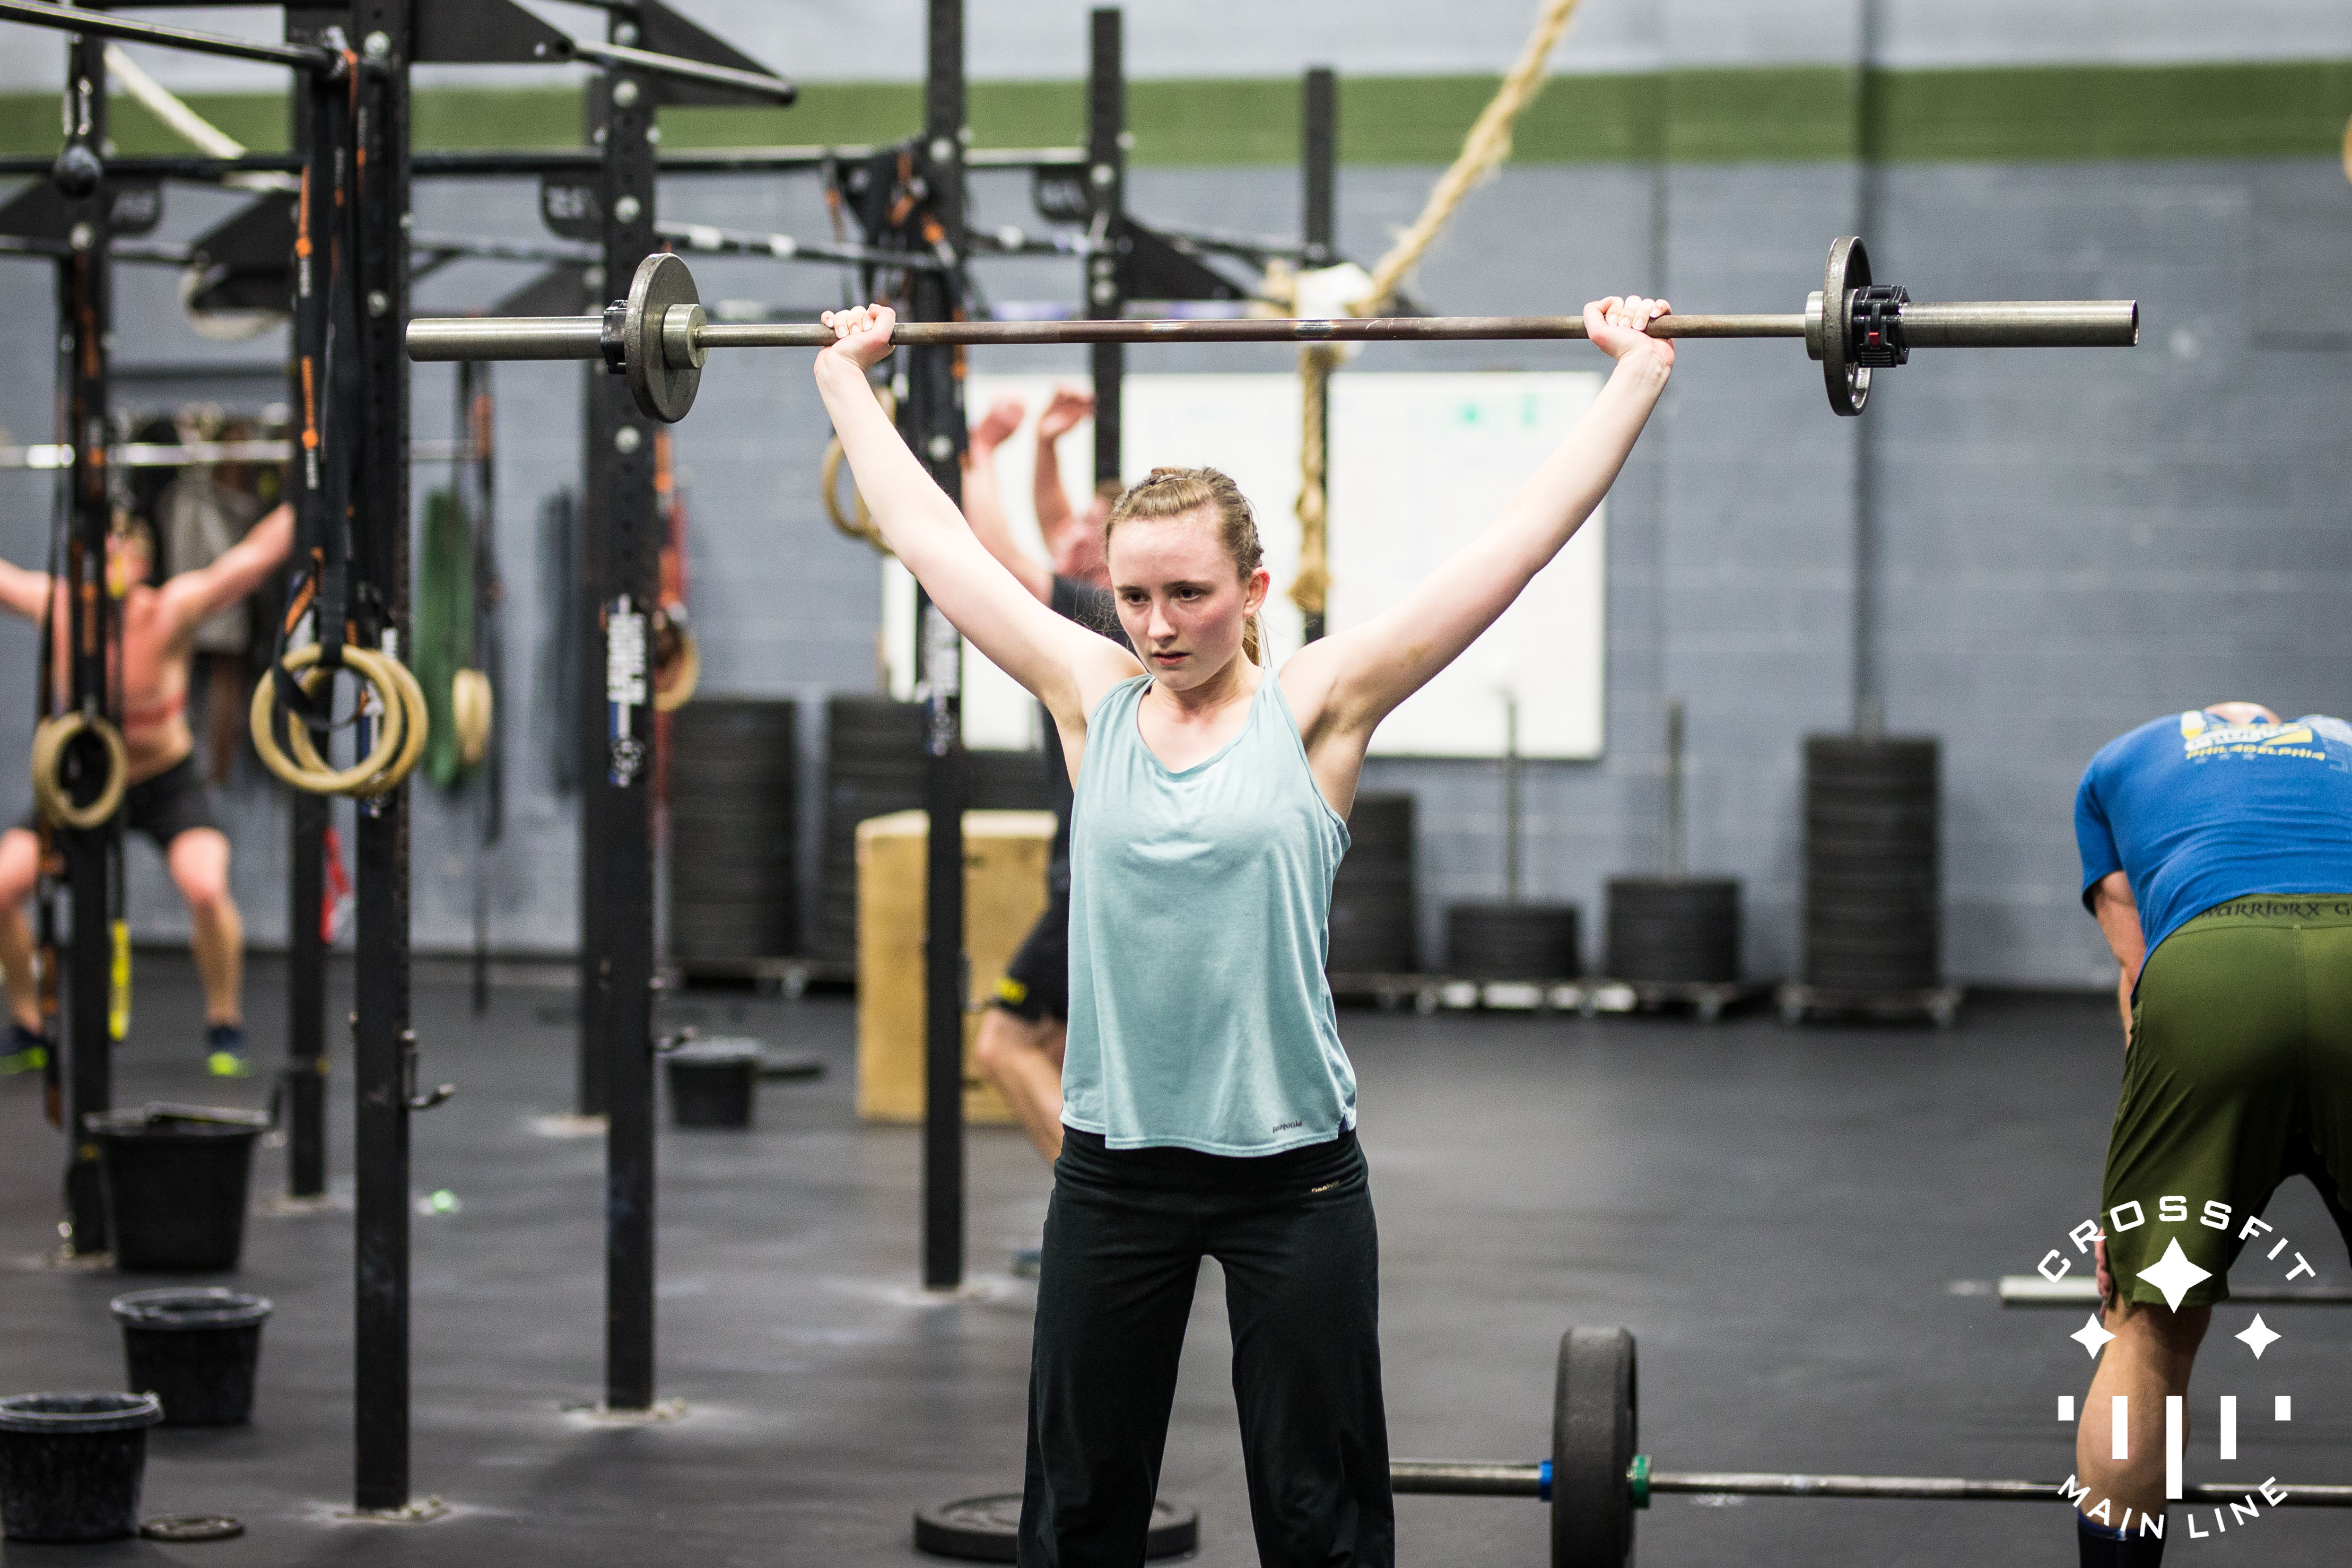 Tuesday 3.5.19 CrossFit